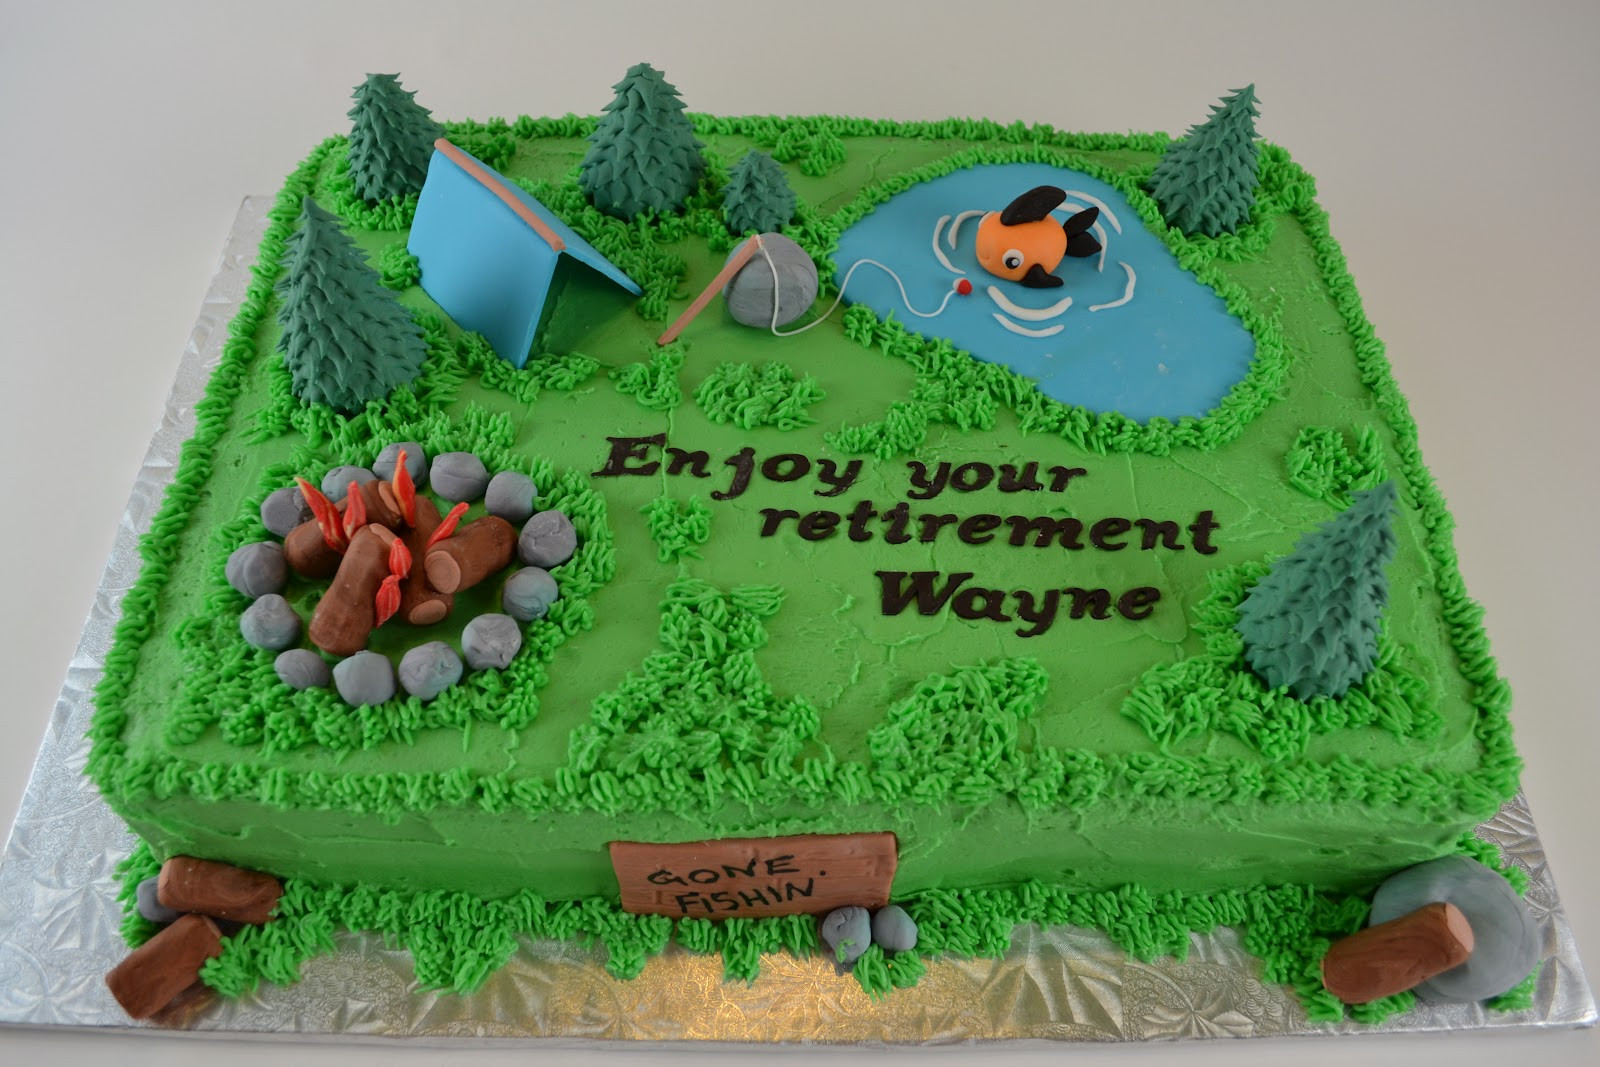 Cake Decorating Ideas For Retirement Party
 Themed Cakes